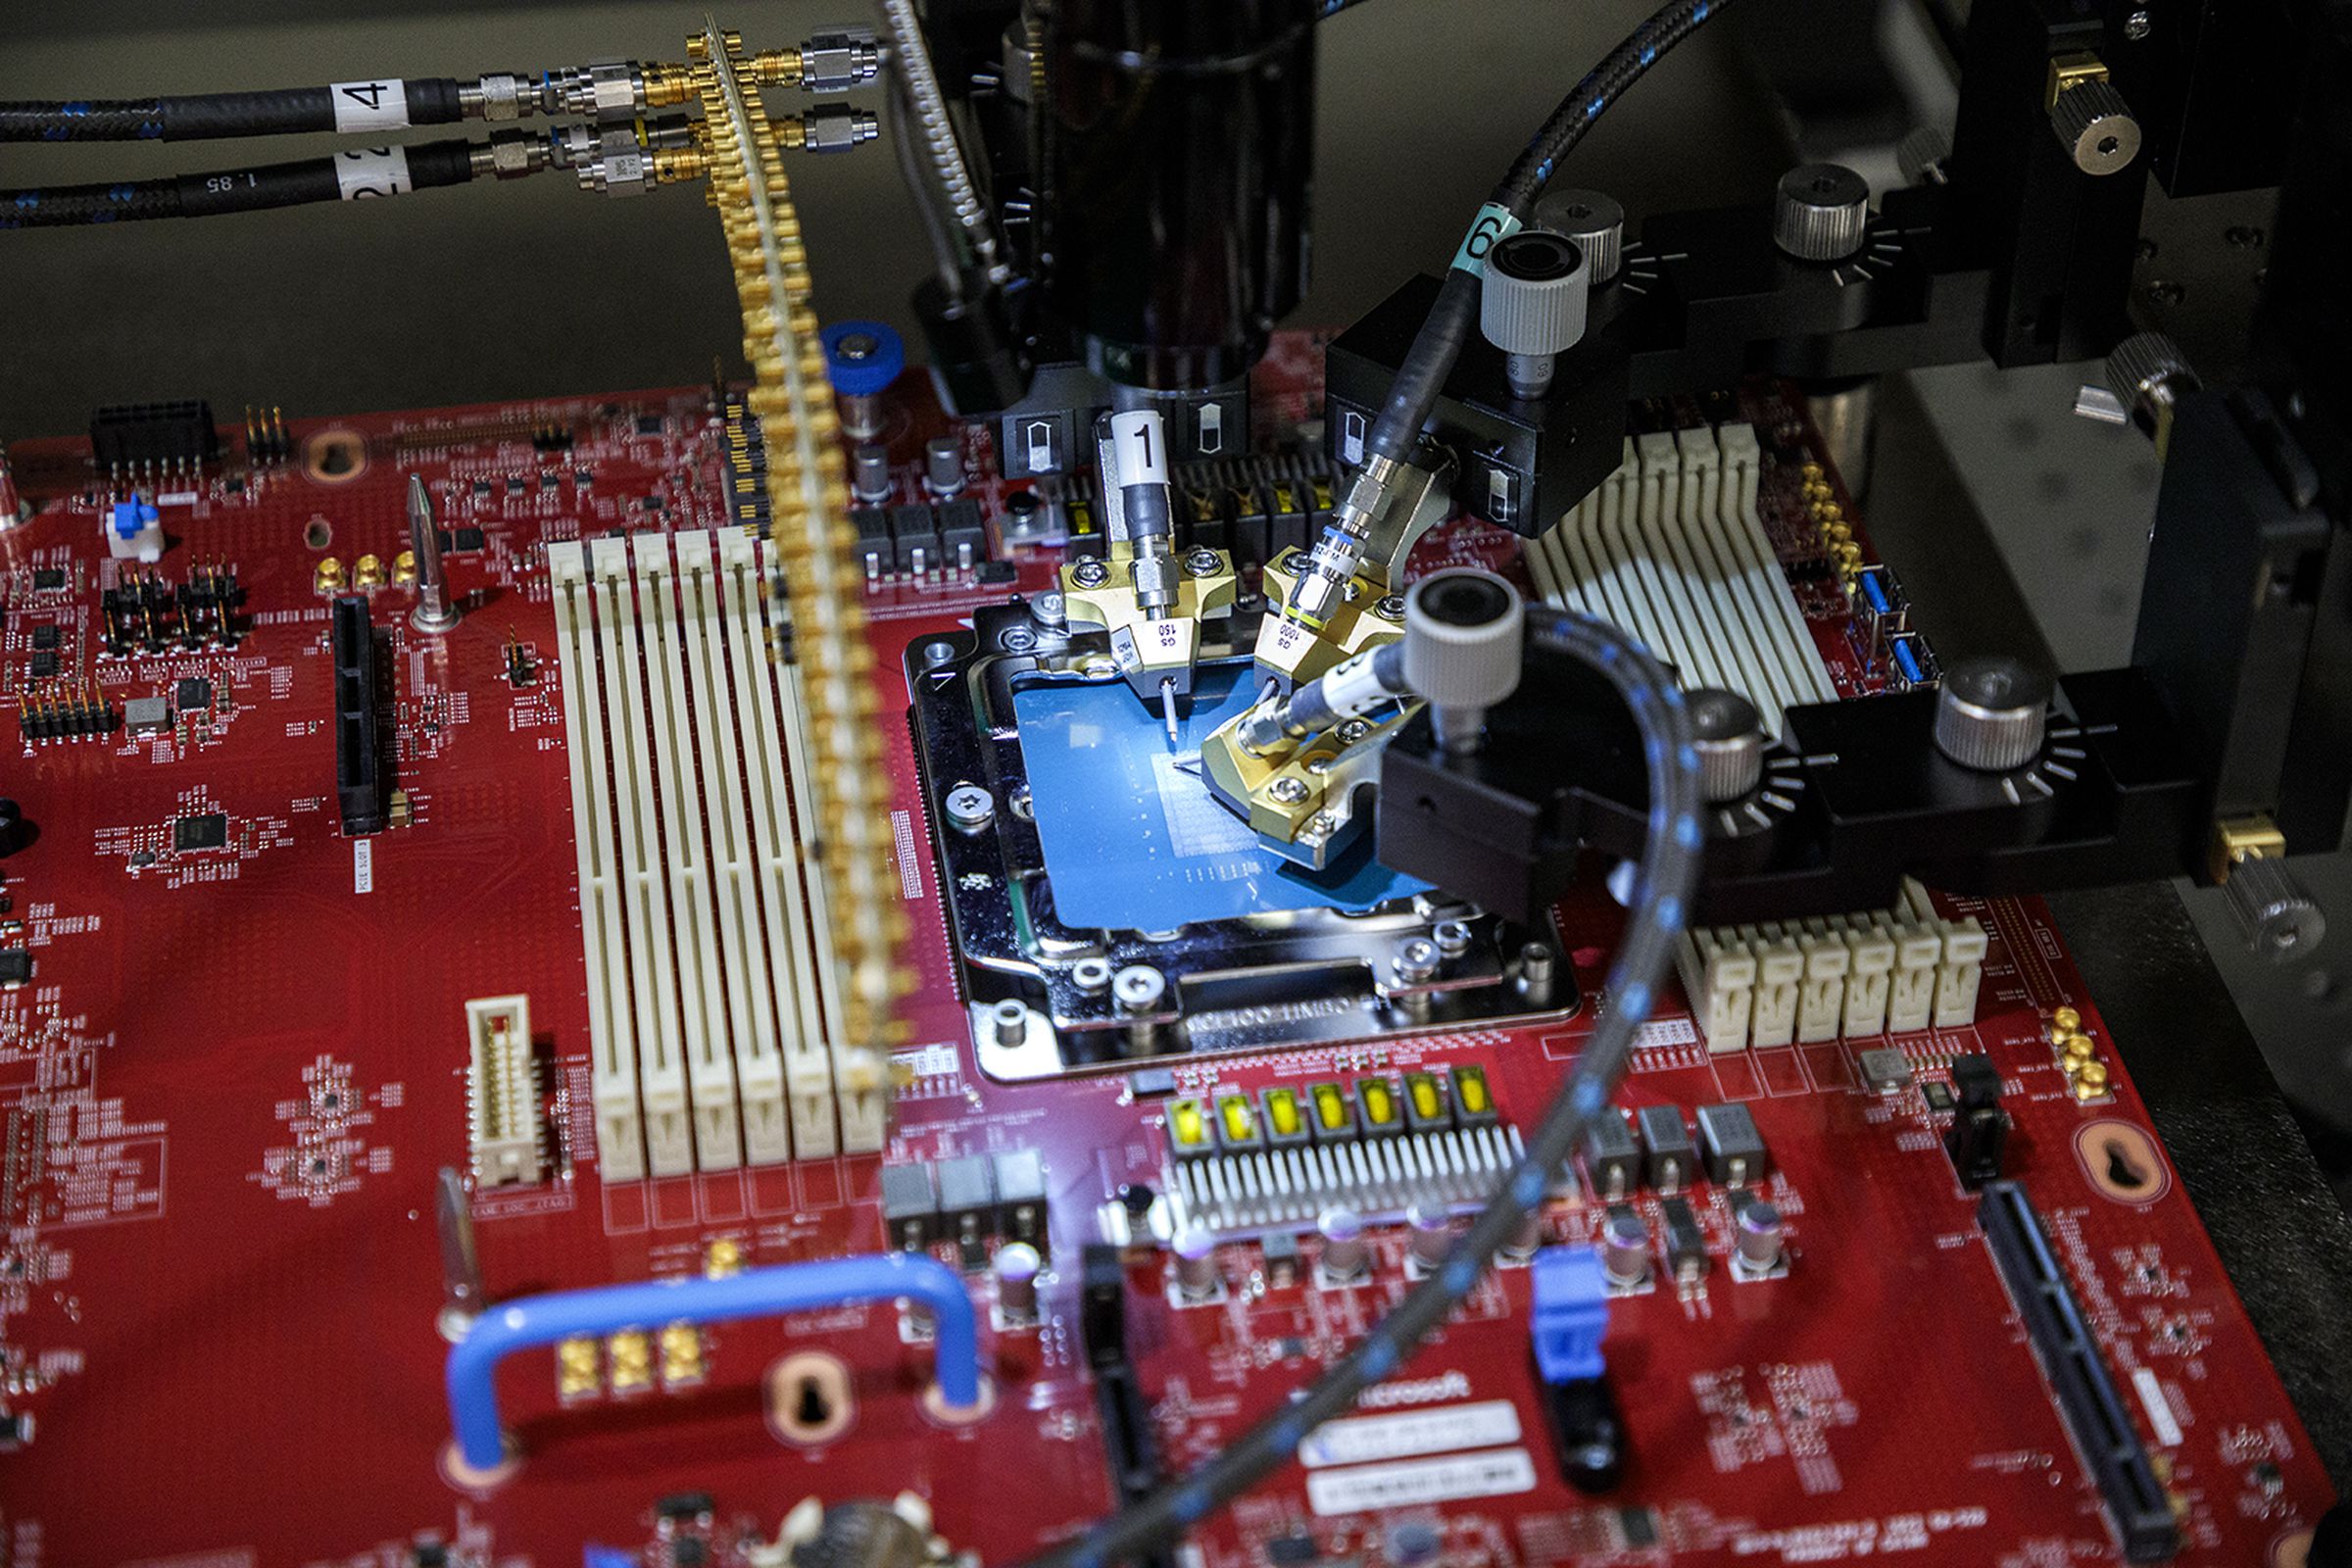 A probe station used to test Microsoft’s Azure Cobalt system-on-chip.